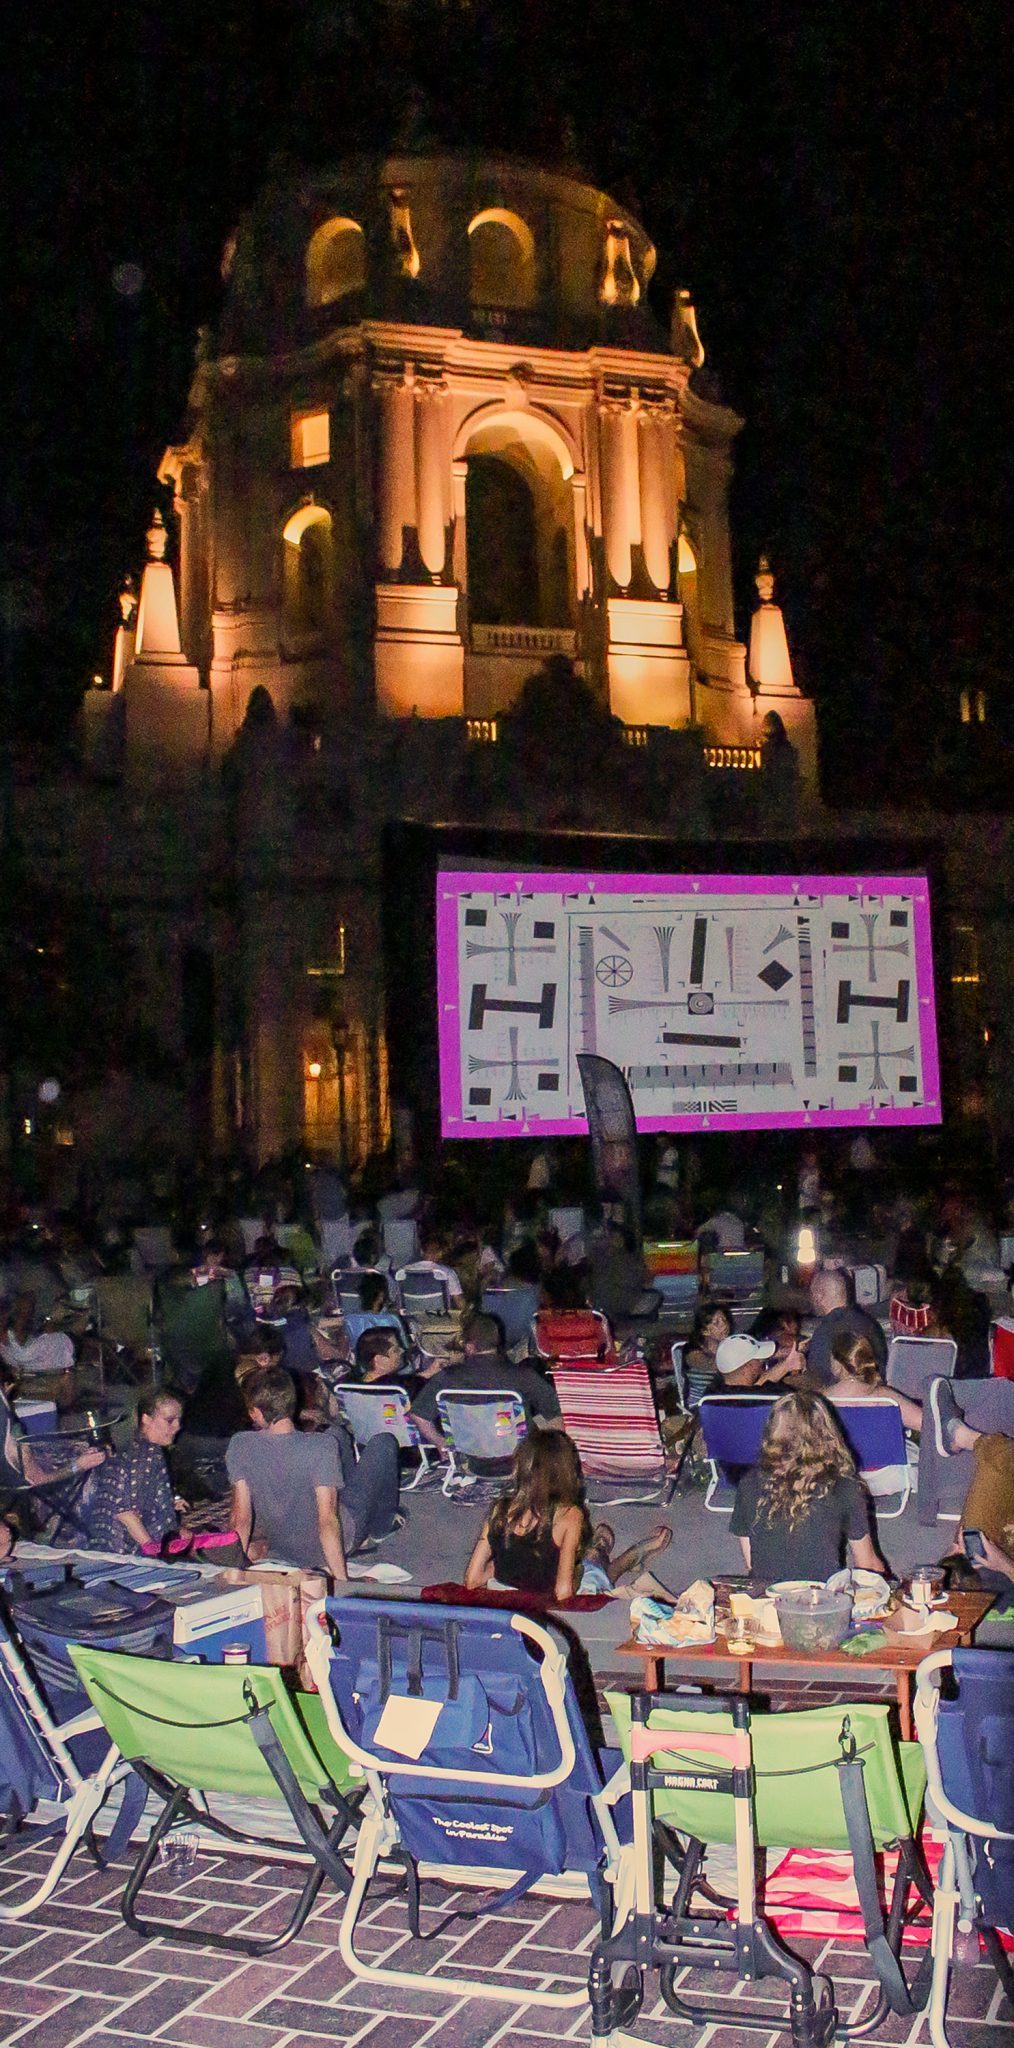 Tickets were sold out to see The Goonies in Centennial Place outside of City Hall on Sat, Sept 13, 2014. The movie was the final movie of the Eat, See, Hear summer movie celebration in Pasadena, CA. The band, The Janks performed while Laemmle Theatre gave out free popcorn, KROQ radio station handed out stickers and various food trucks sold food. (Mary Nurrenbern/Courier)